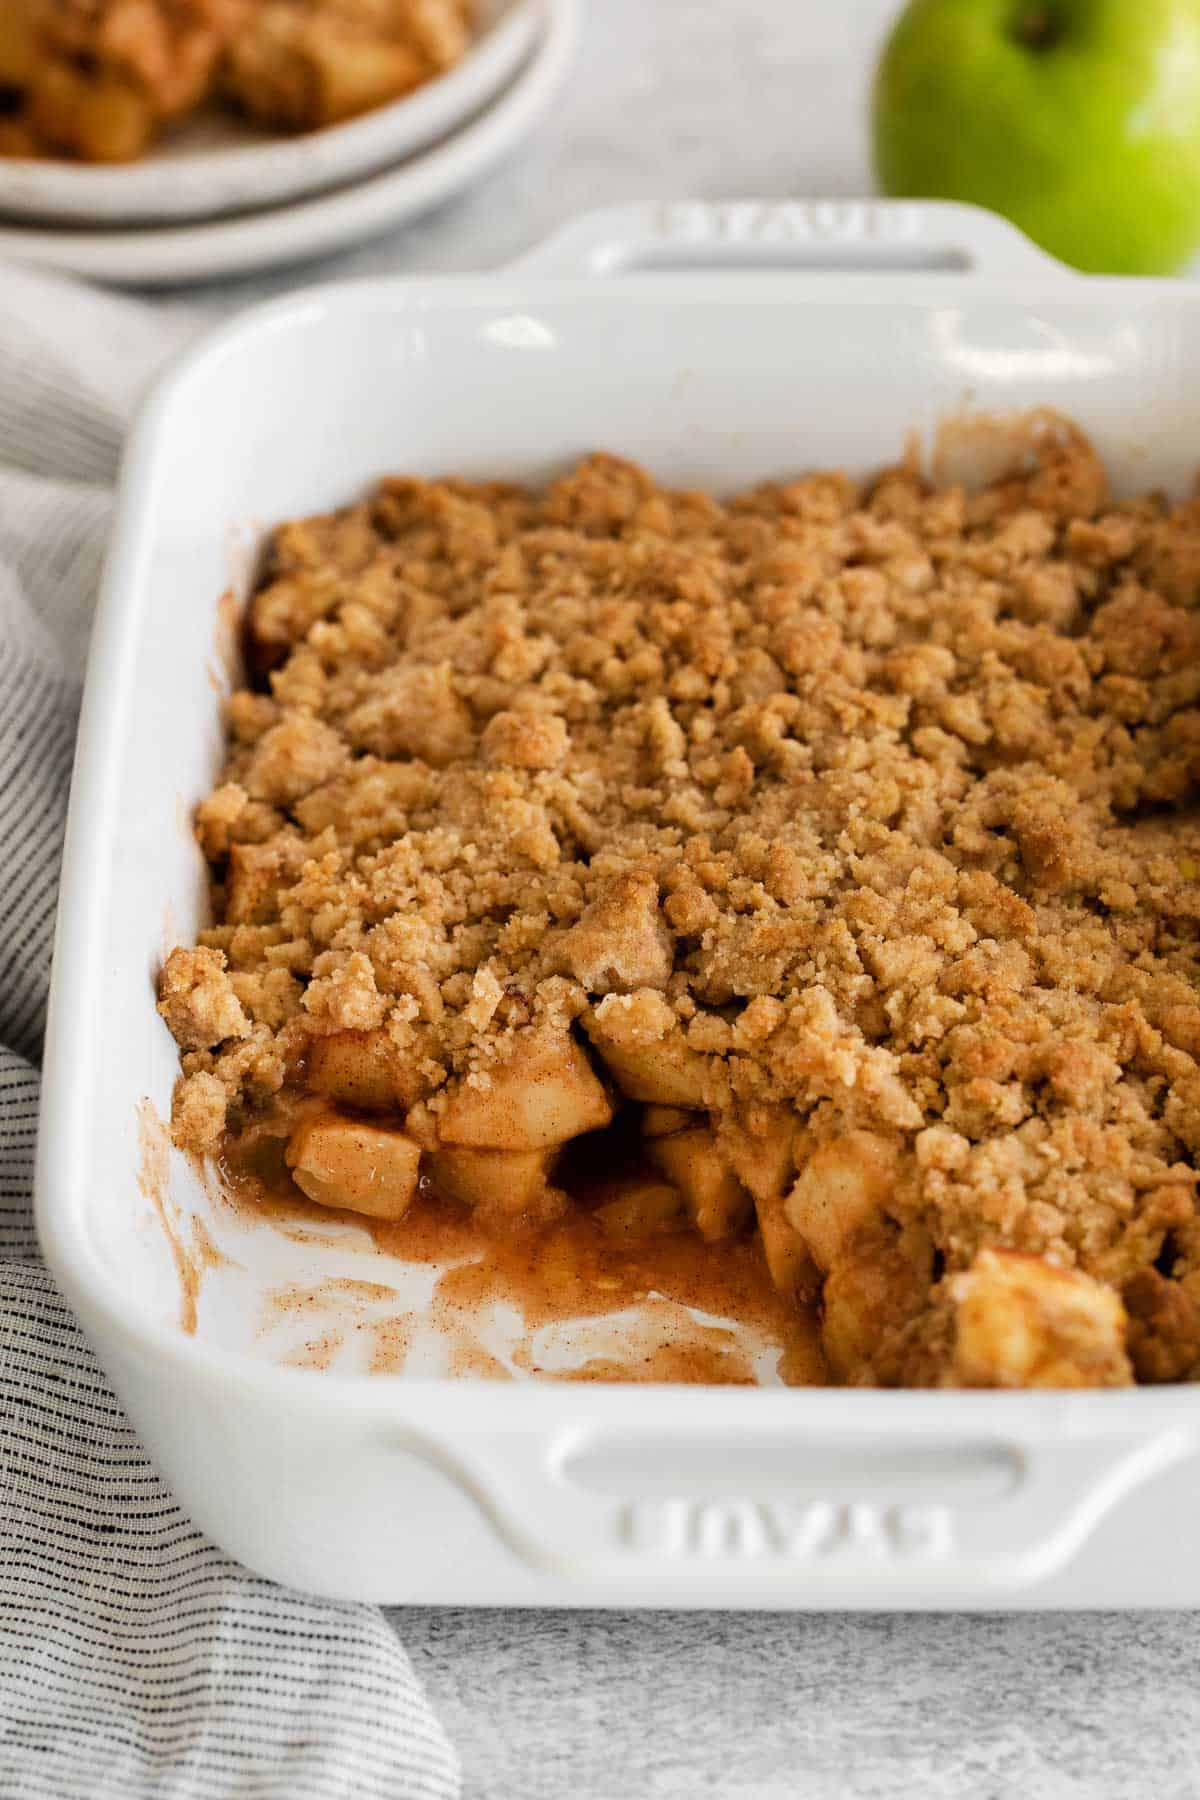 A dish of apple crumble, with a serving scooped out